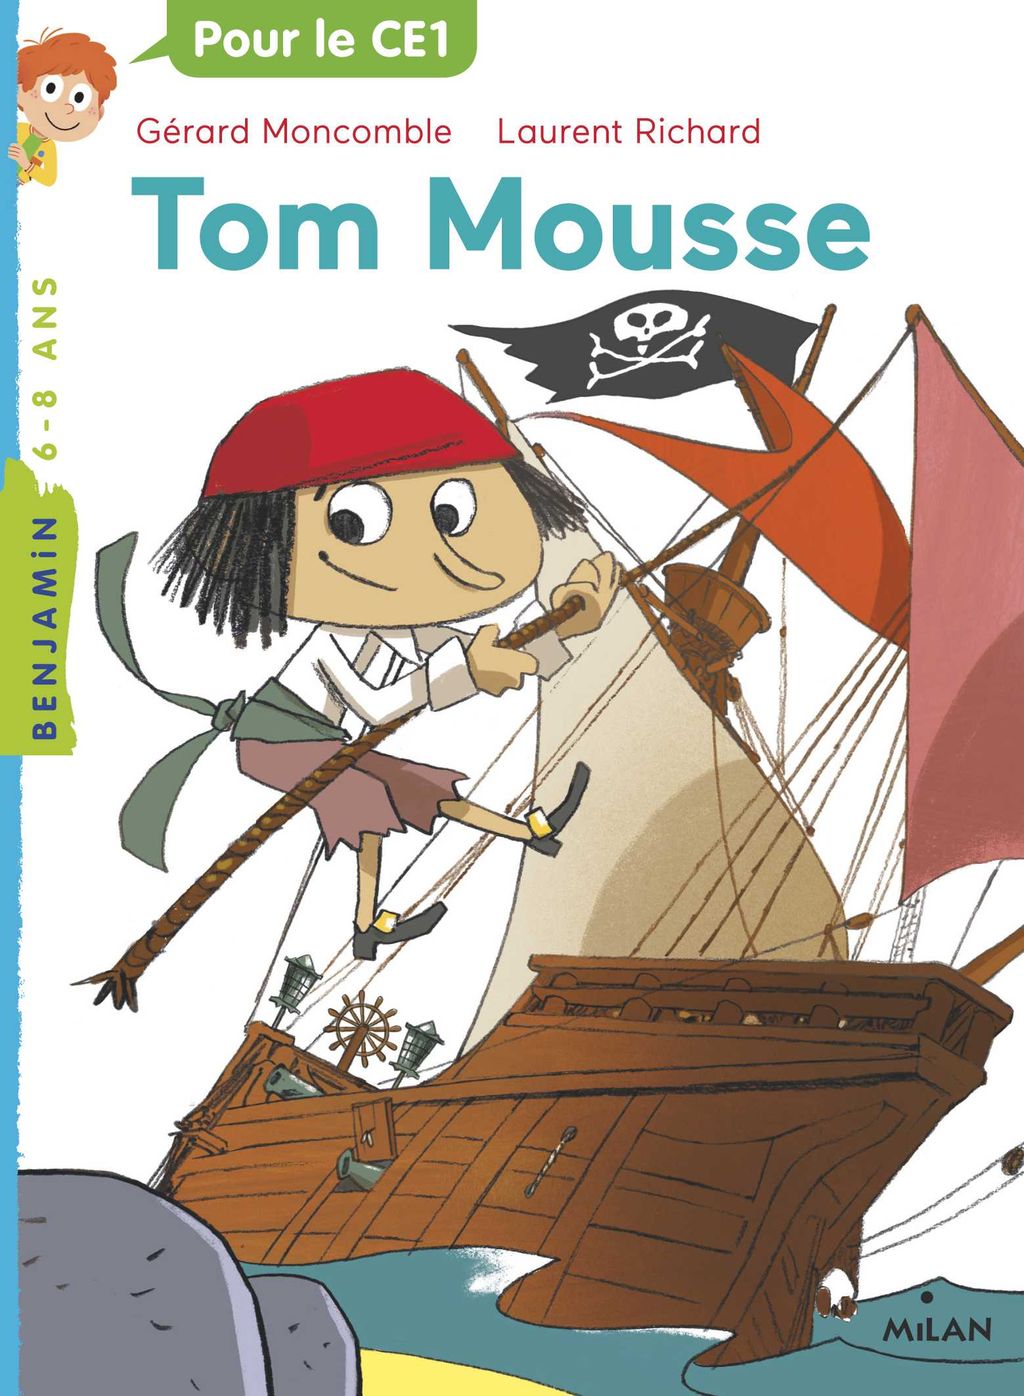 « Tom Mousse » cover